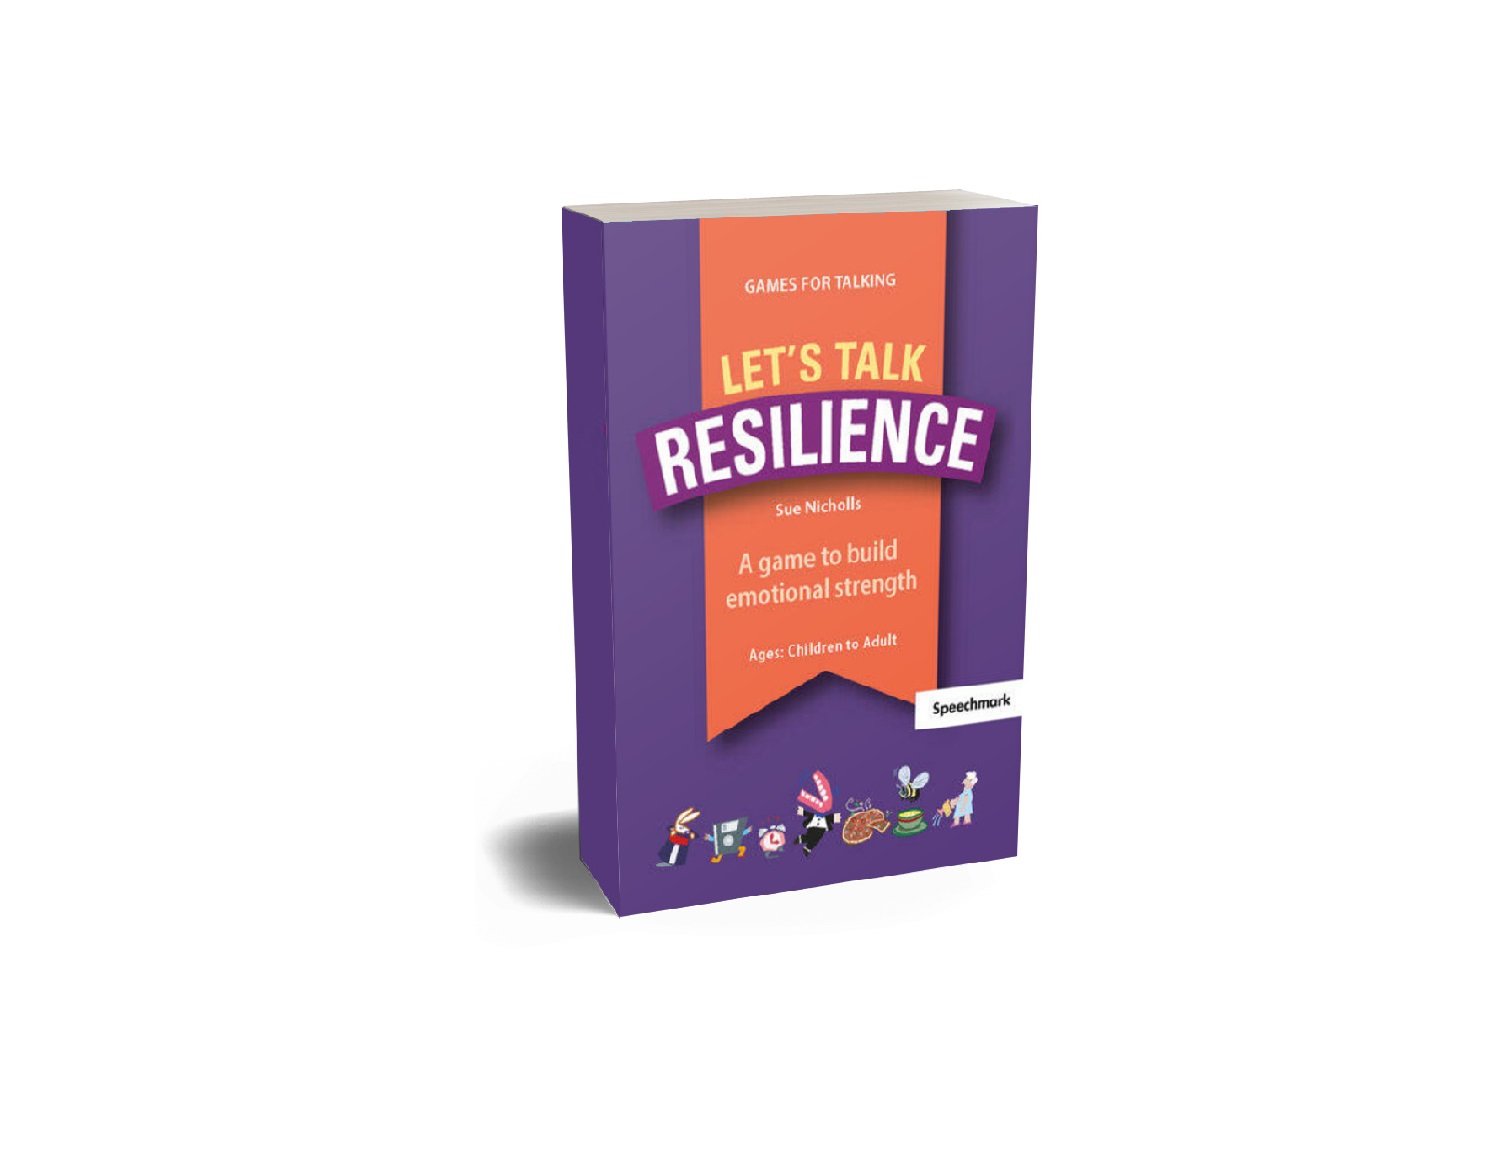 the　Card　Let's　Outside　Resilience　Talk:　Resources　Boxed　Set　Box　Learning